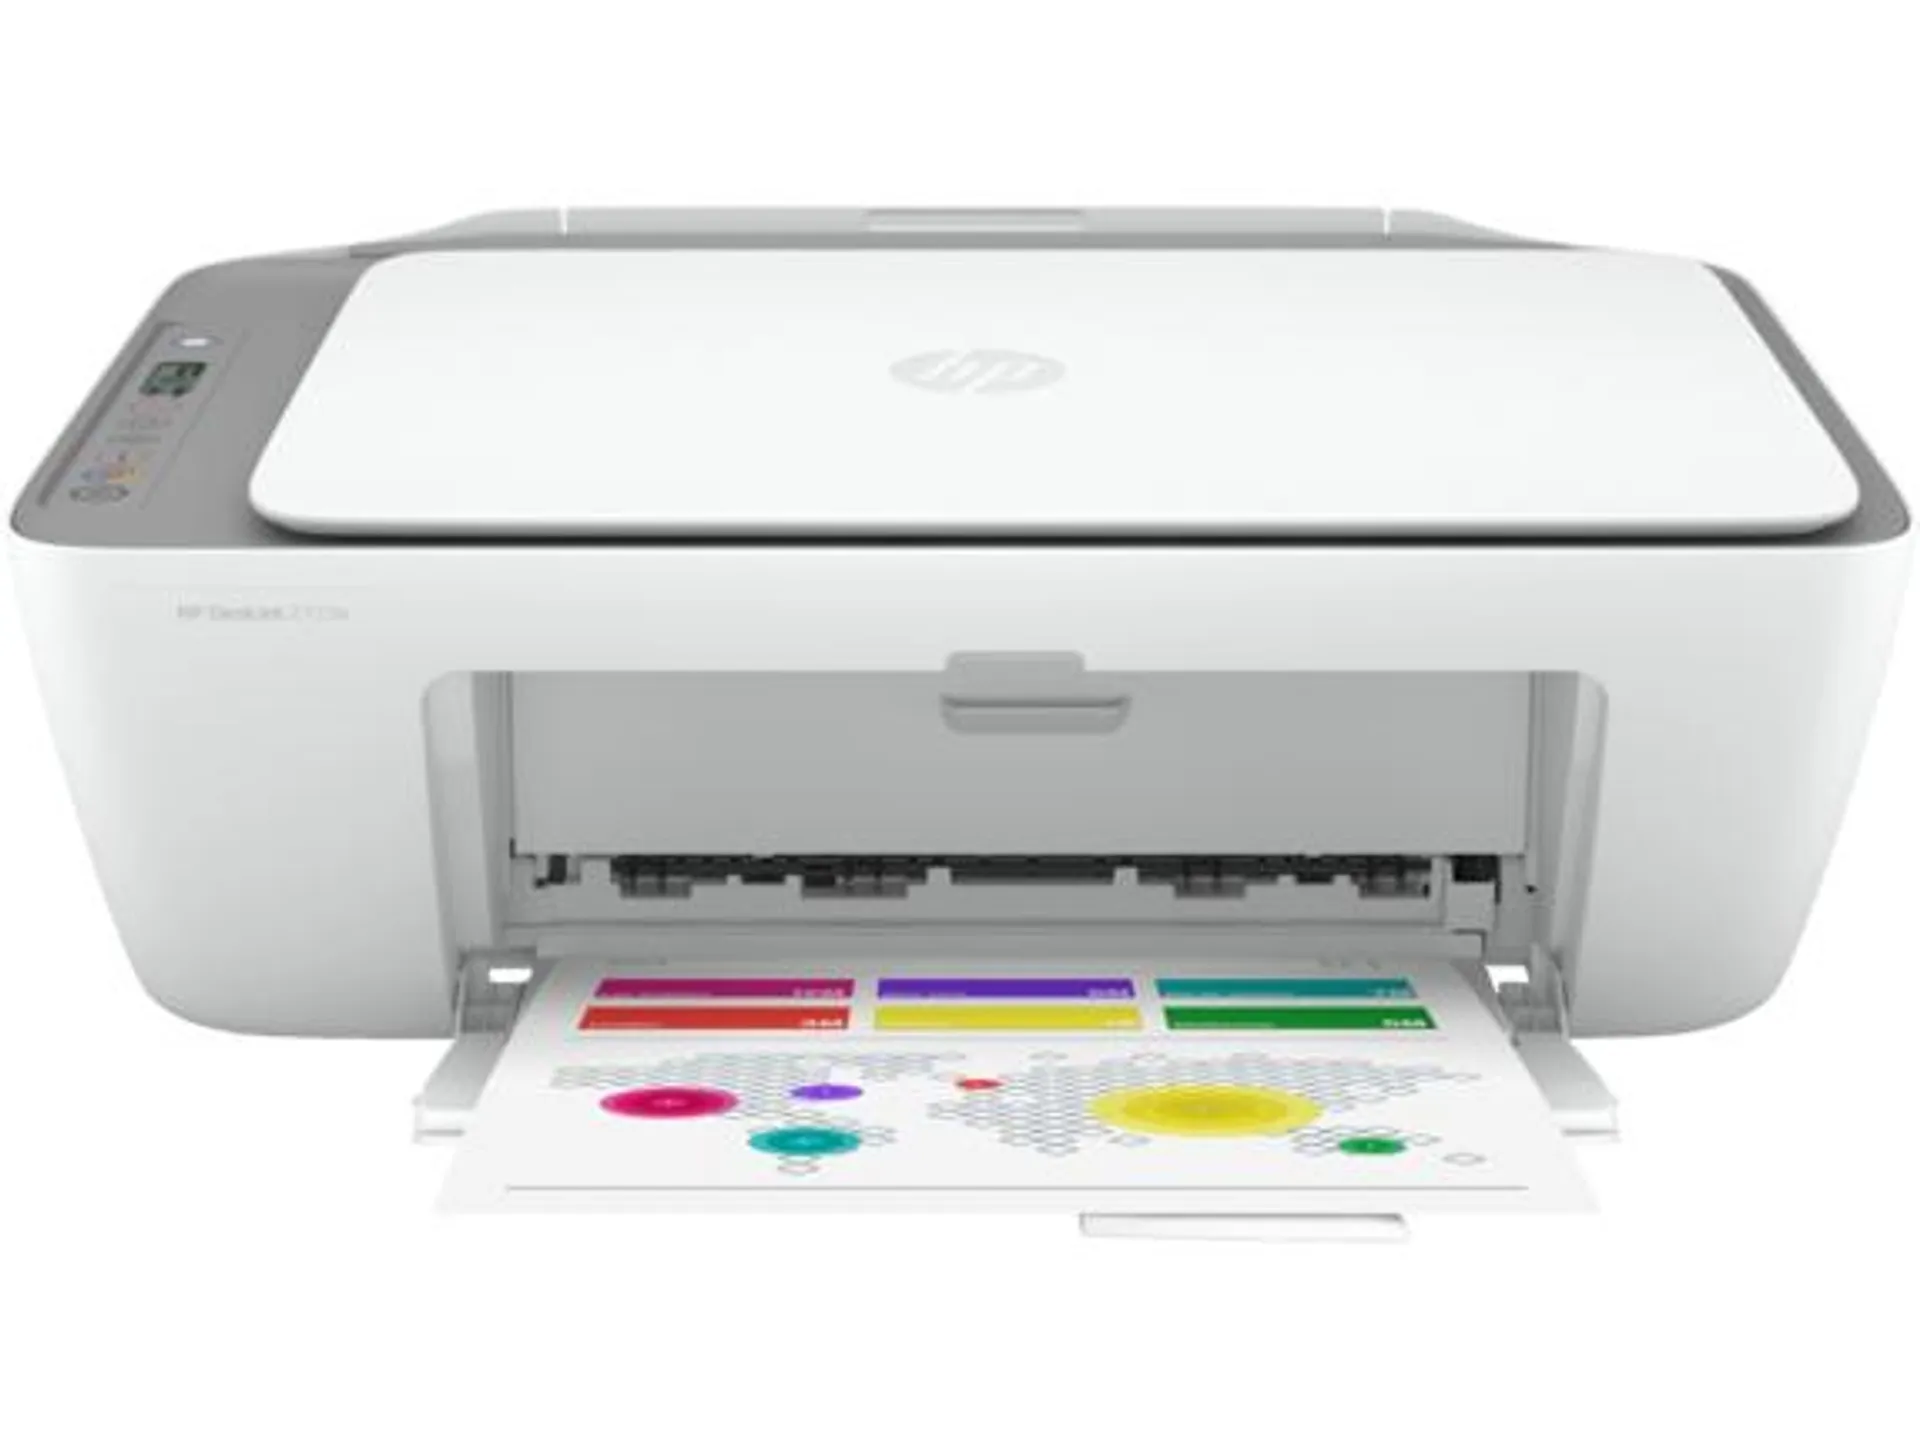 HP DeskJet 2723e All-in-One Printer with Bonus 3 Months of Instant Ink with HP+